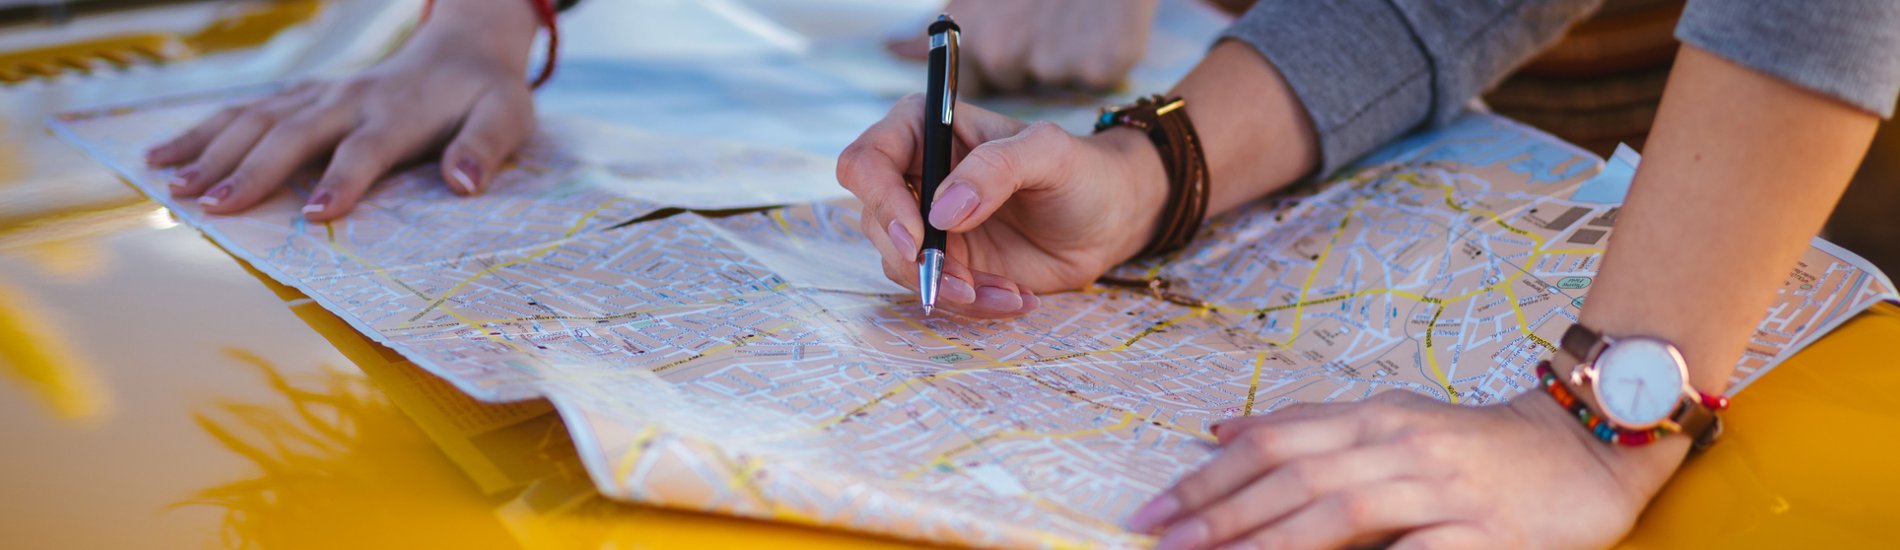 Student reviewing a street map